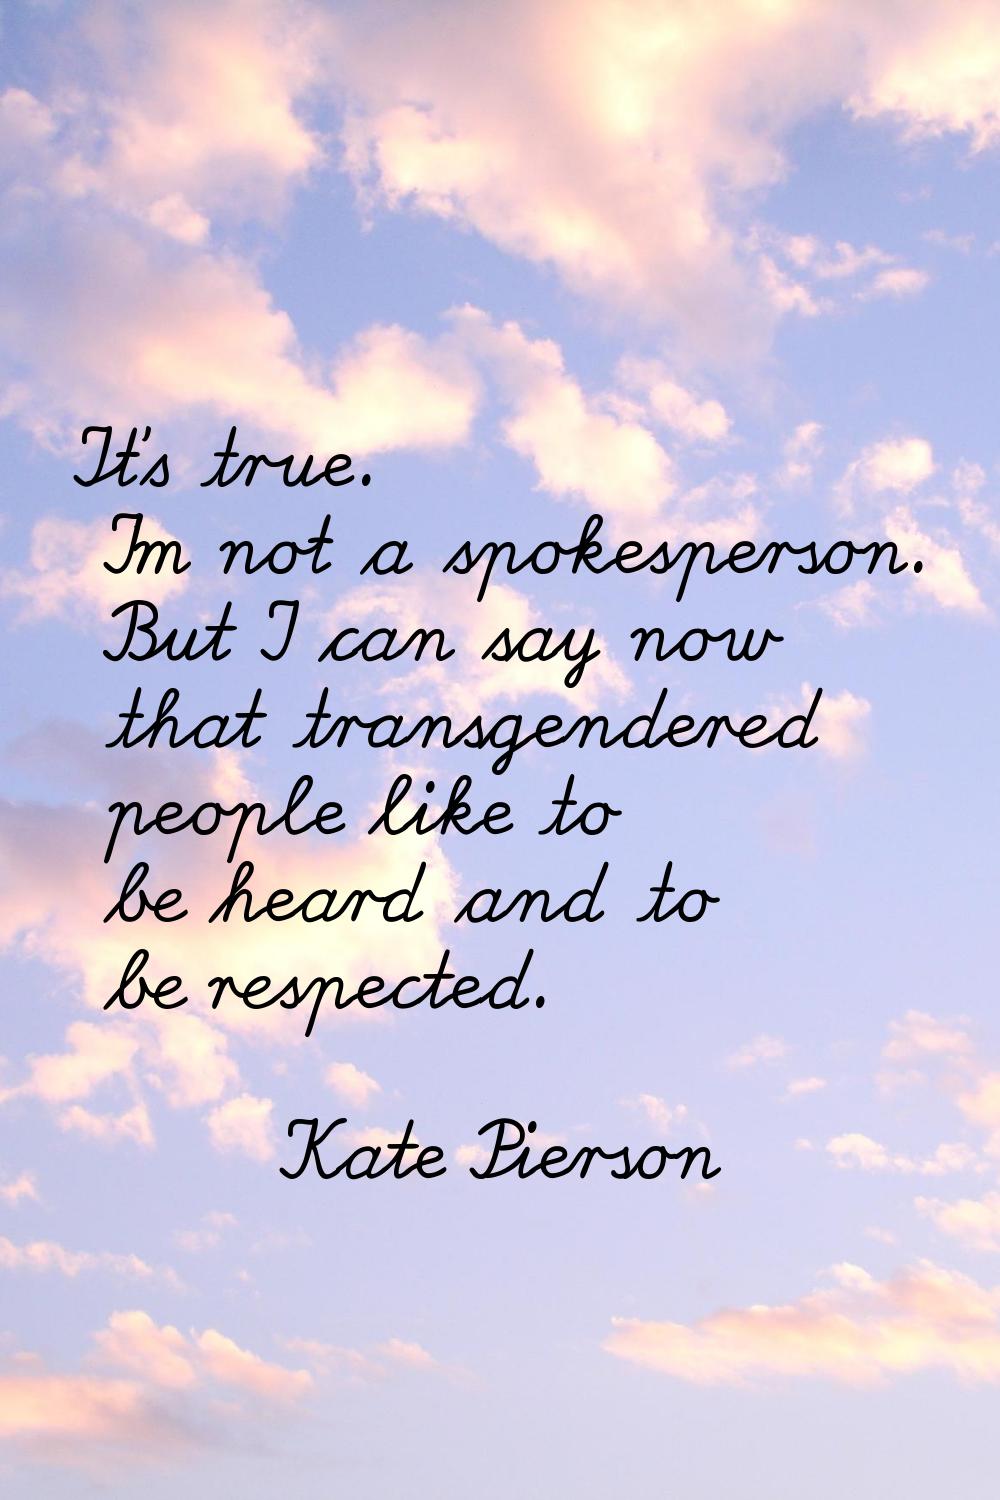 It's true. I'm not a spokesperson. But I can say now that transgendered people like to be heard and